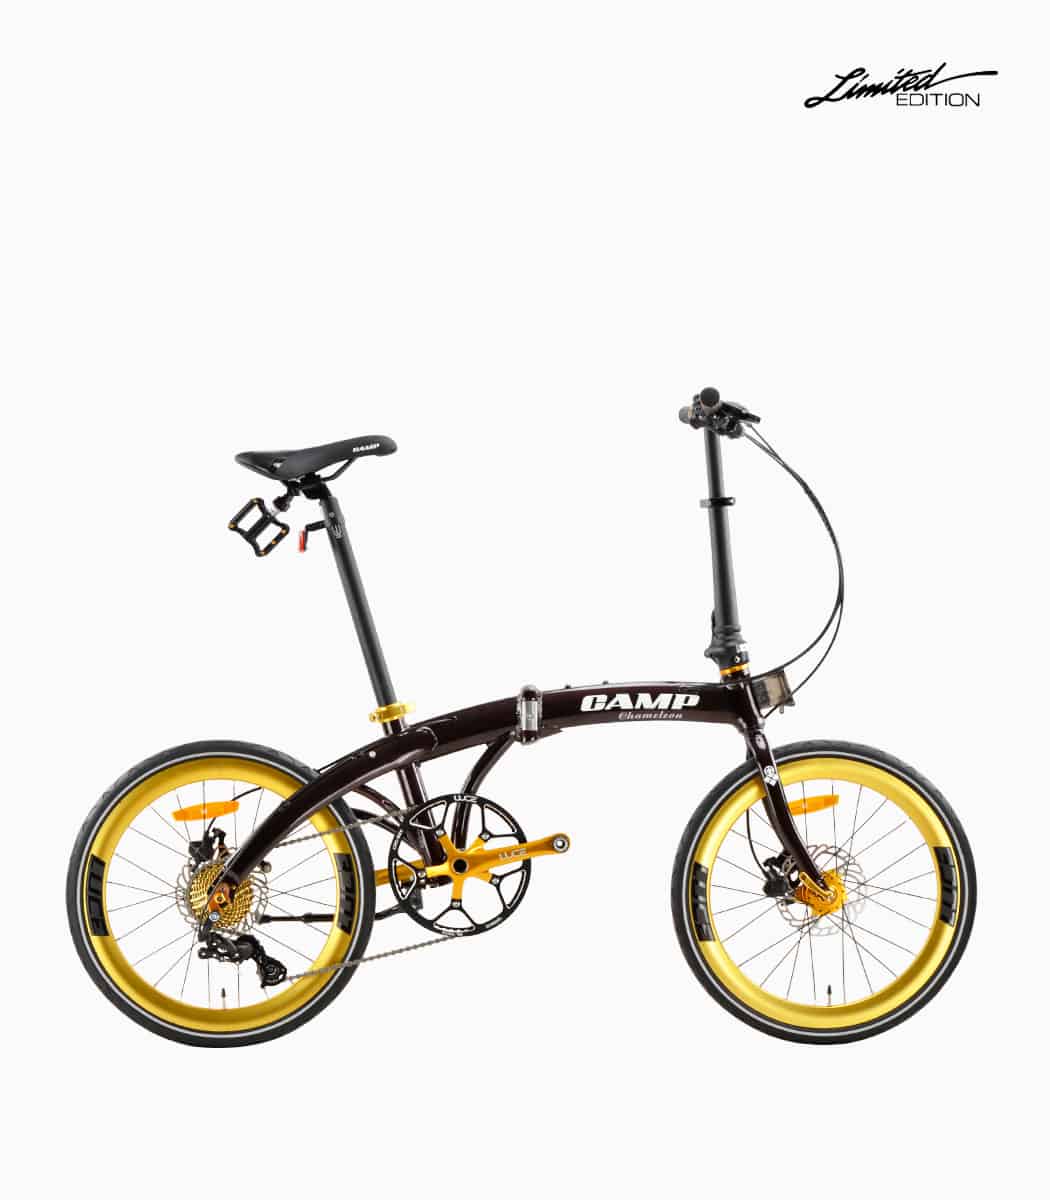 CAMP Chameleon (BLACK CHERRY PEARL) foldable bicycle with gold rim reflective tyres right